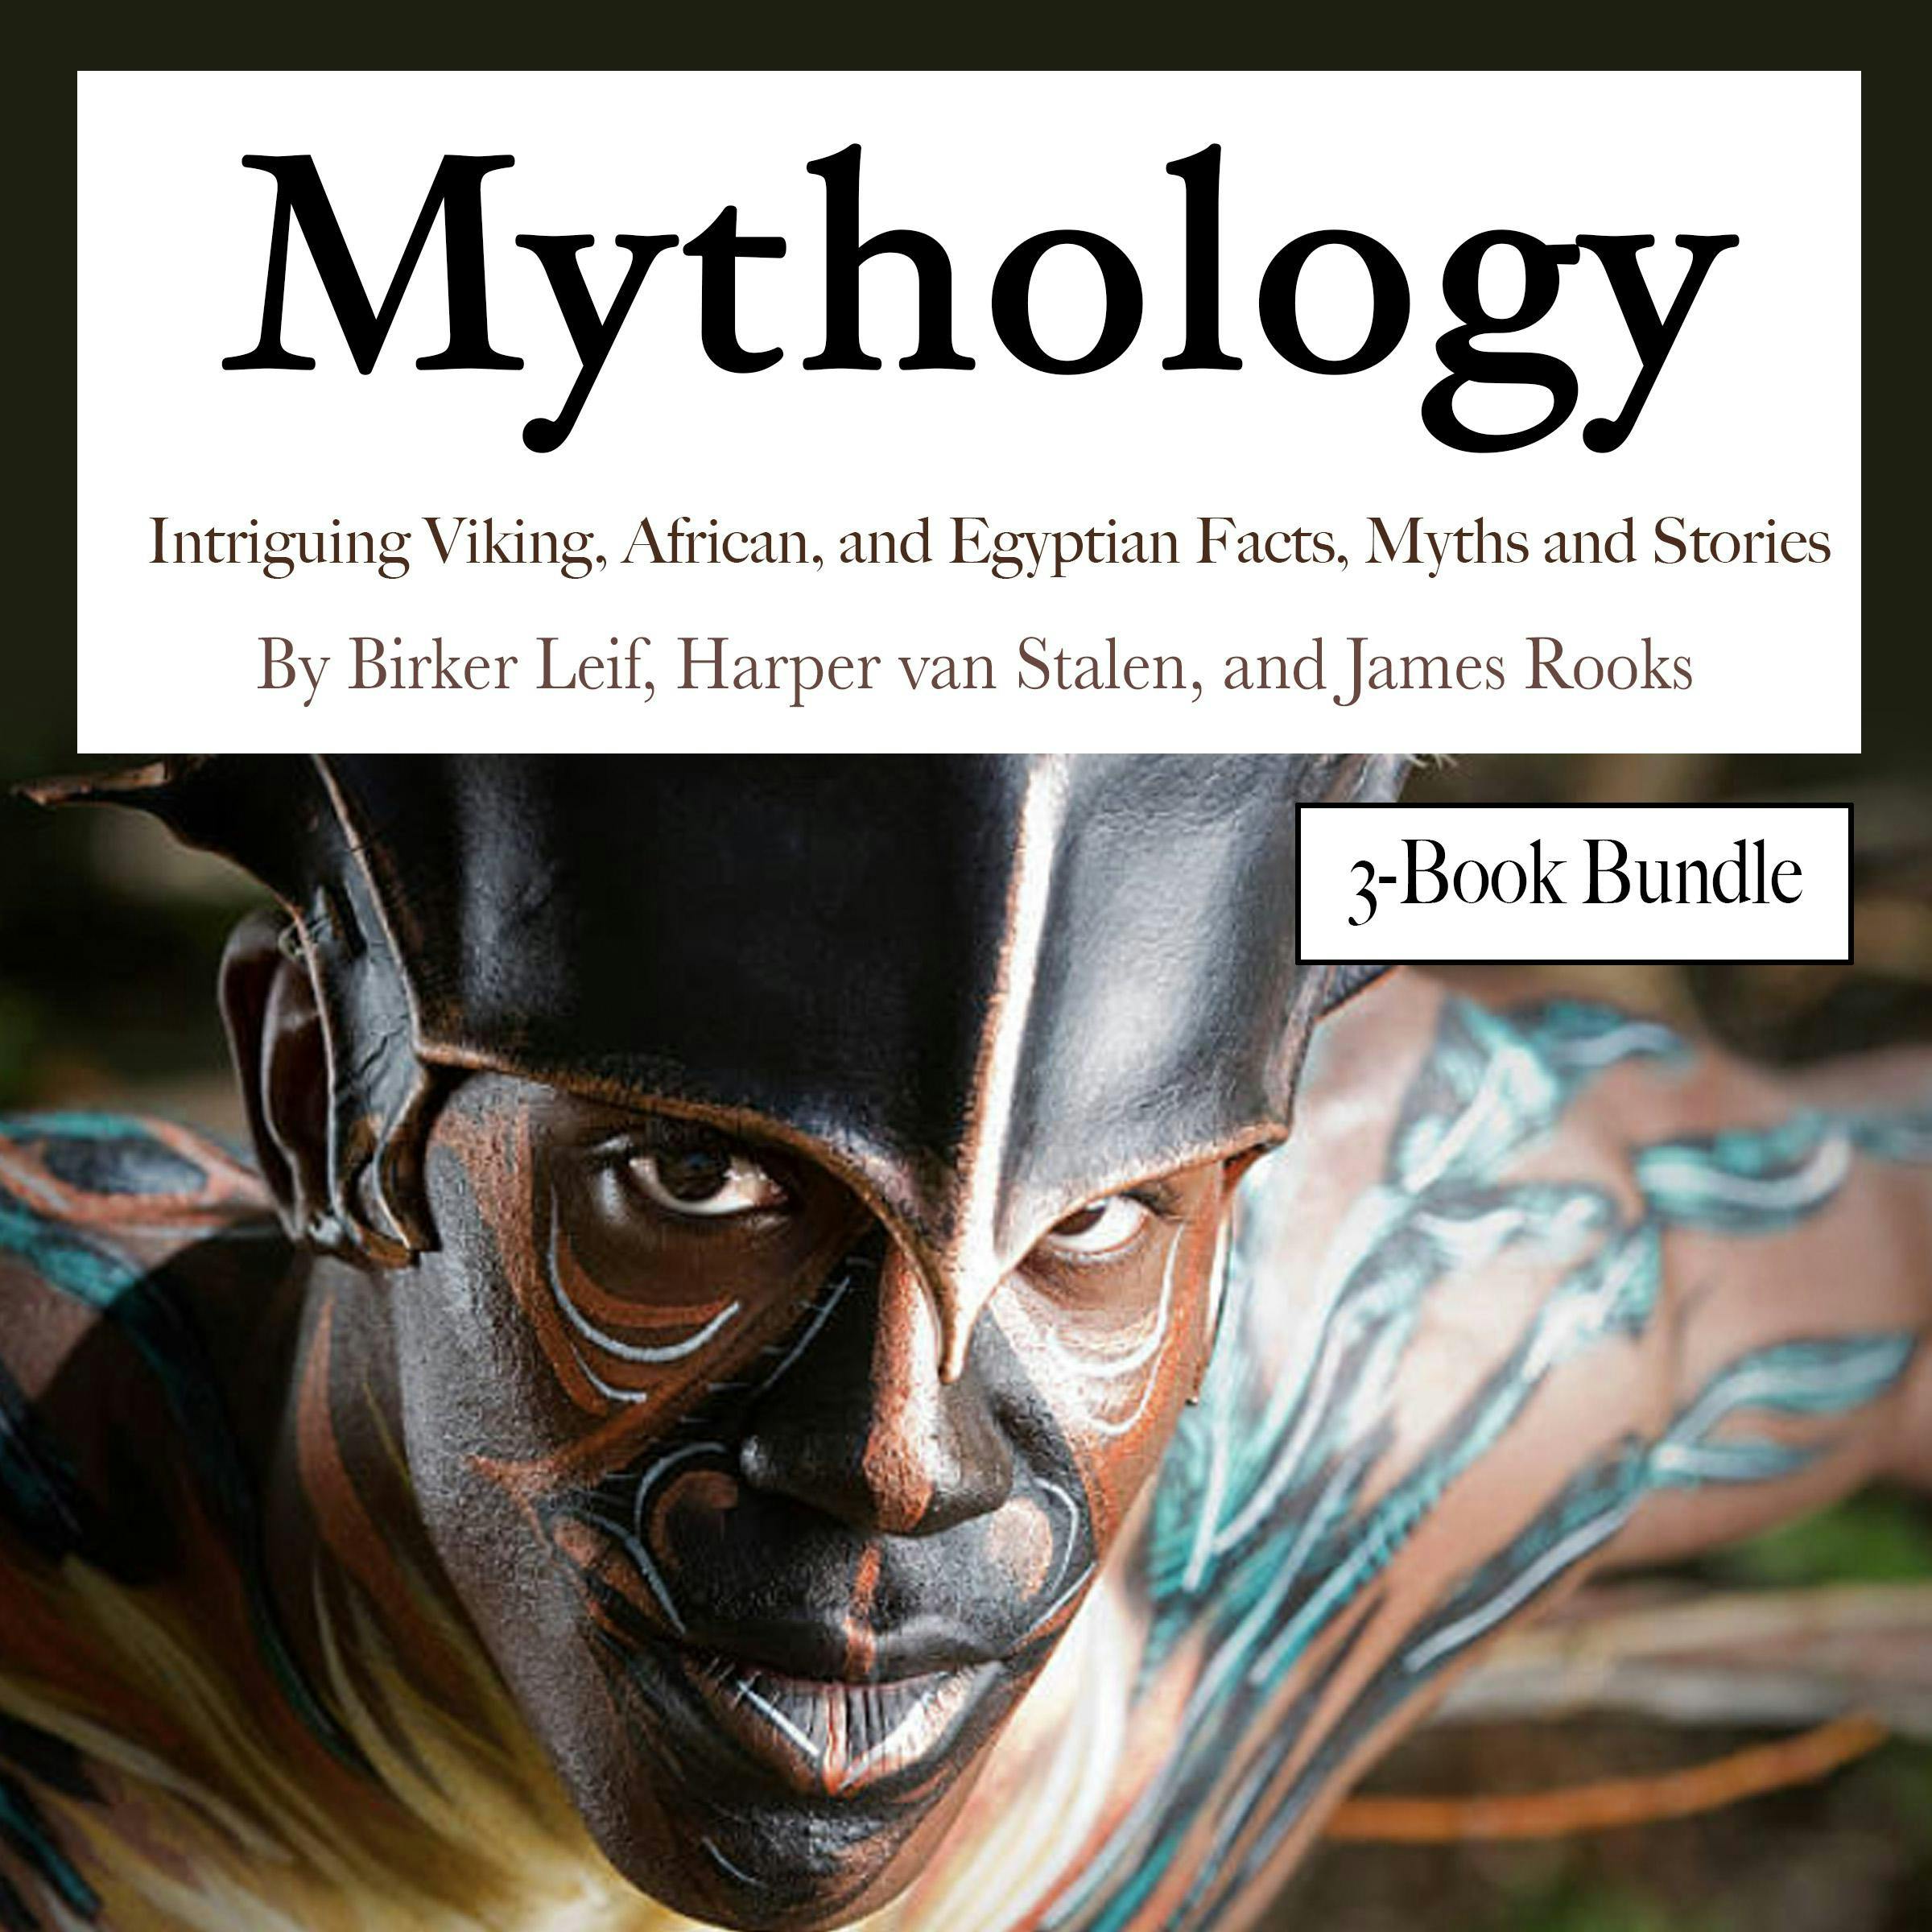 Mythology: Intriguing Viking, African, and Egyptian Facts, Myths and Stories - James Rooks, Birker Leif, Harper van Stalen